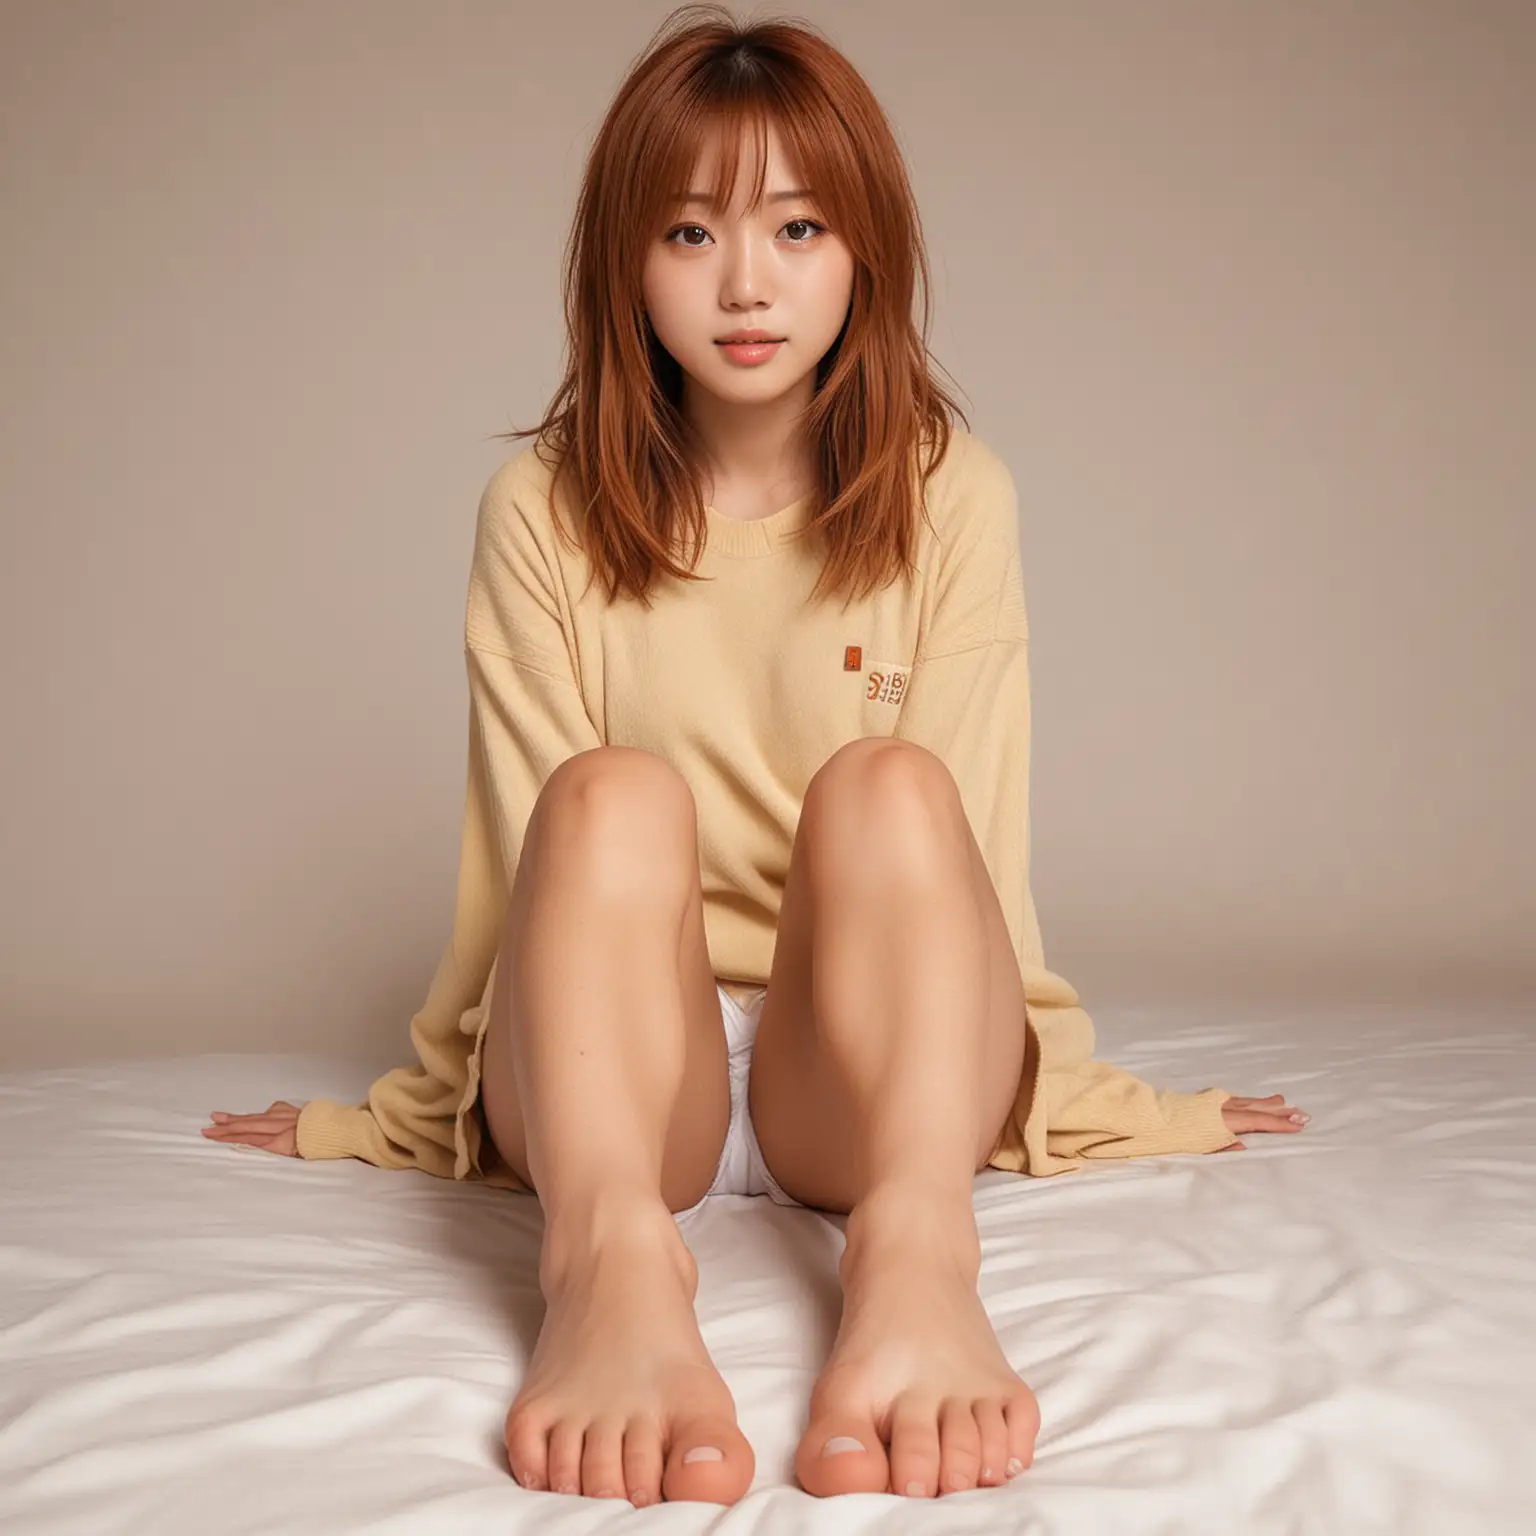 Fullbody Japanese girl with caramel-colored medium length hair, freckles and huge amber eyes showing her feet